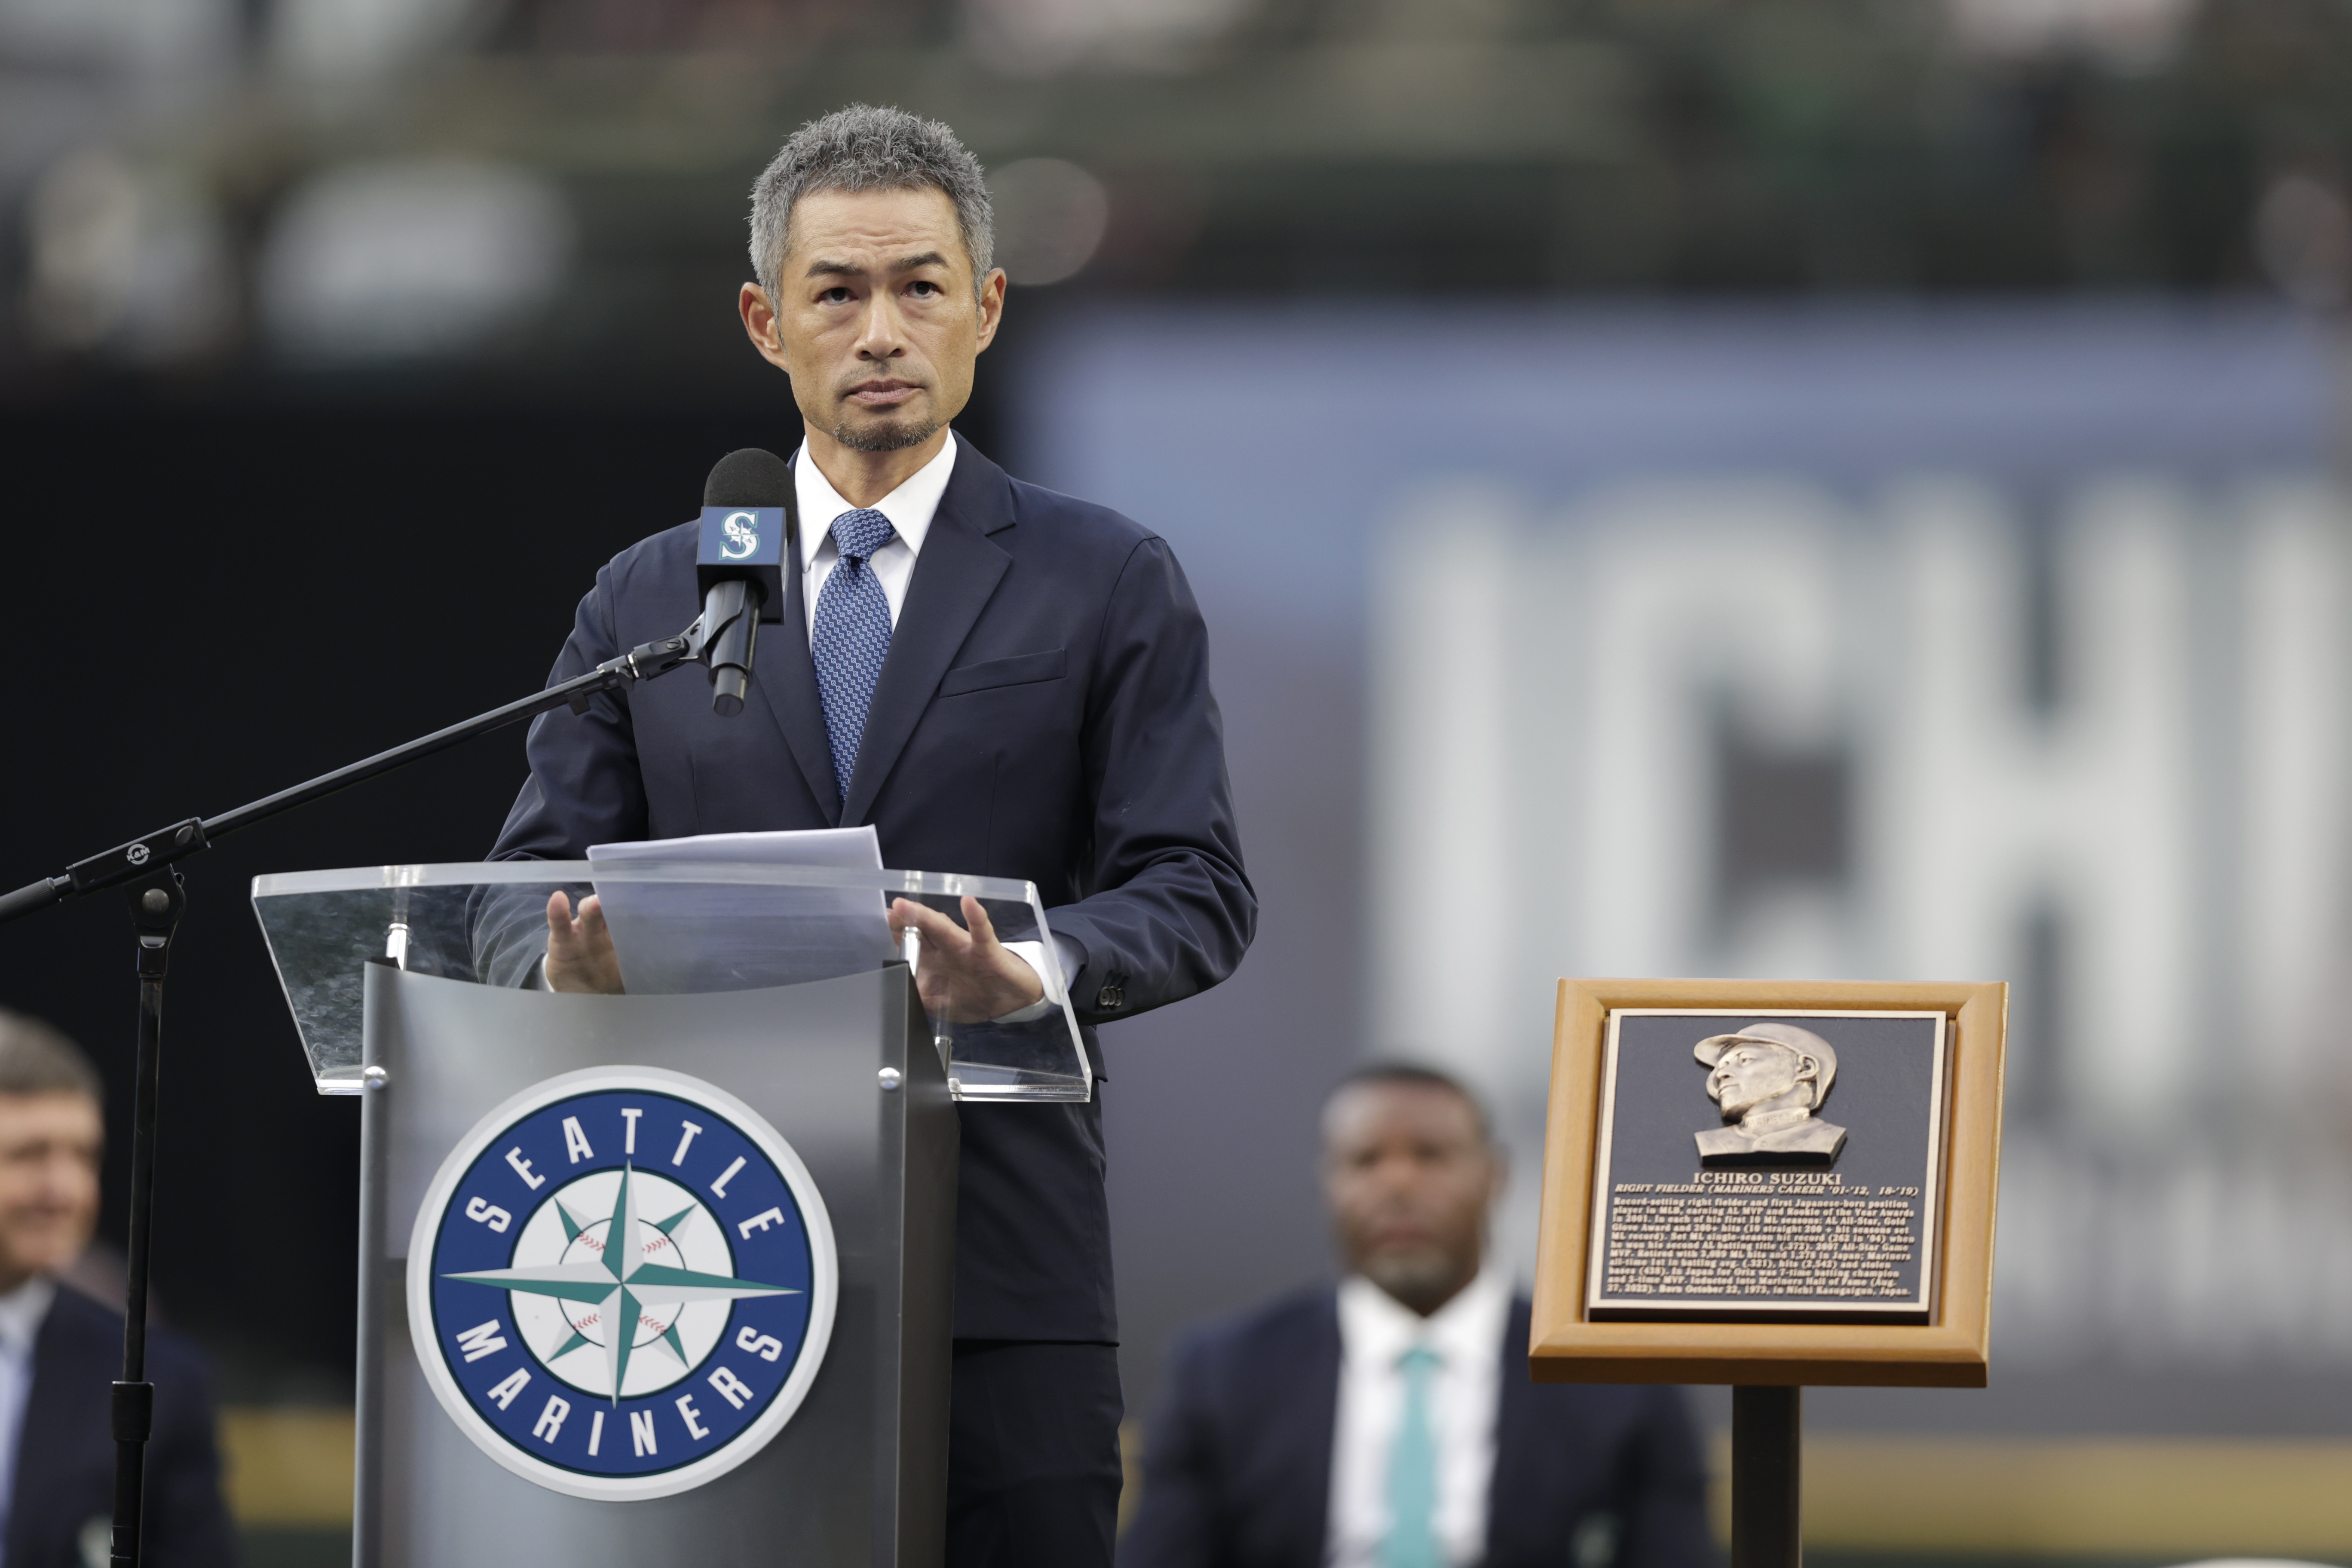 VIDEO: After Trade, Ichiro Says Sayonara To Seattle With Hit As A Yankee